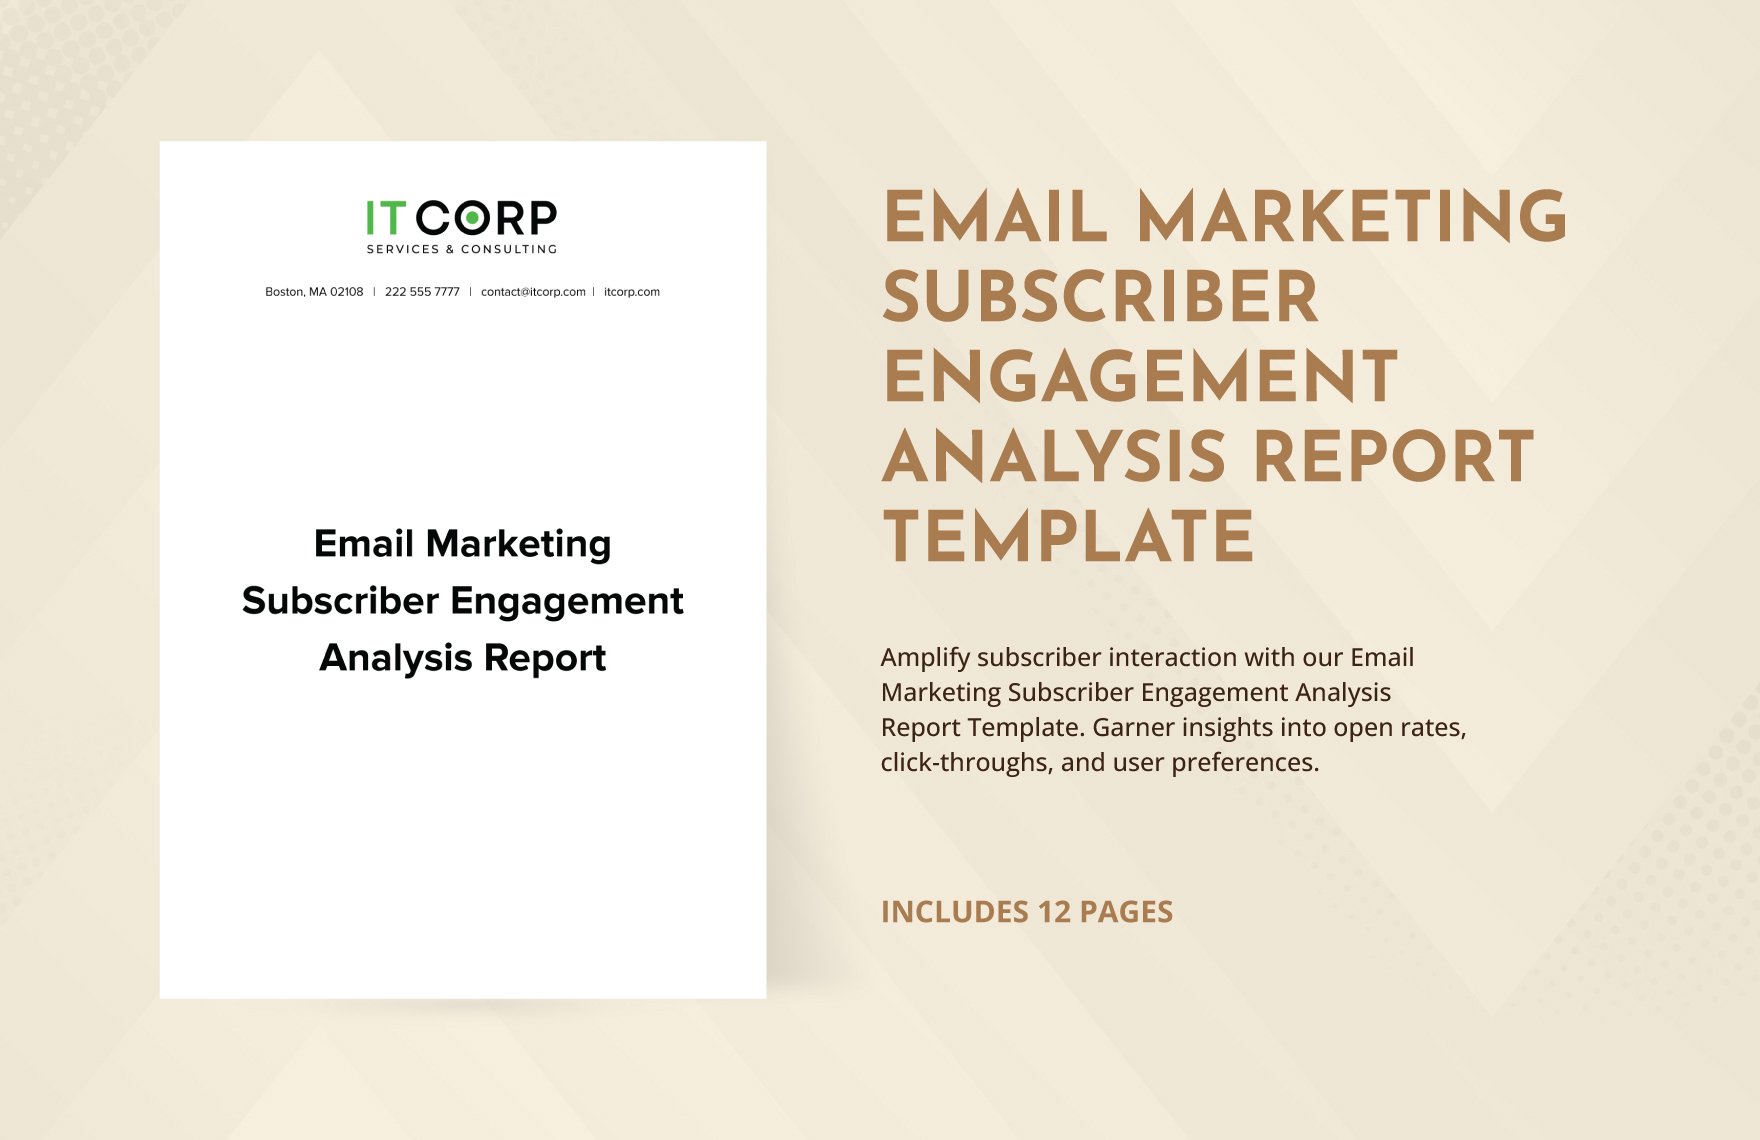 Email Marketing Subscriber Engagement Analysis Report Template